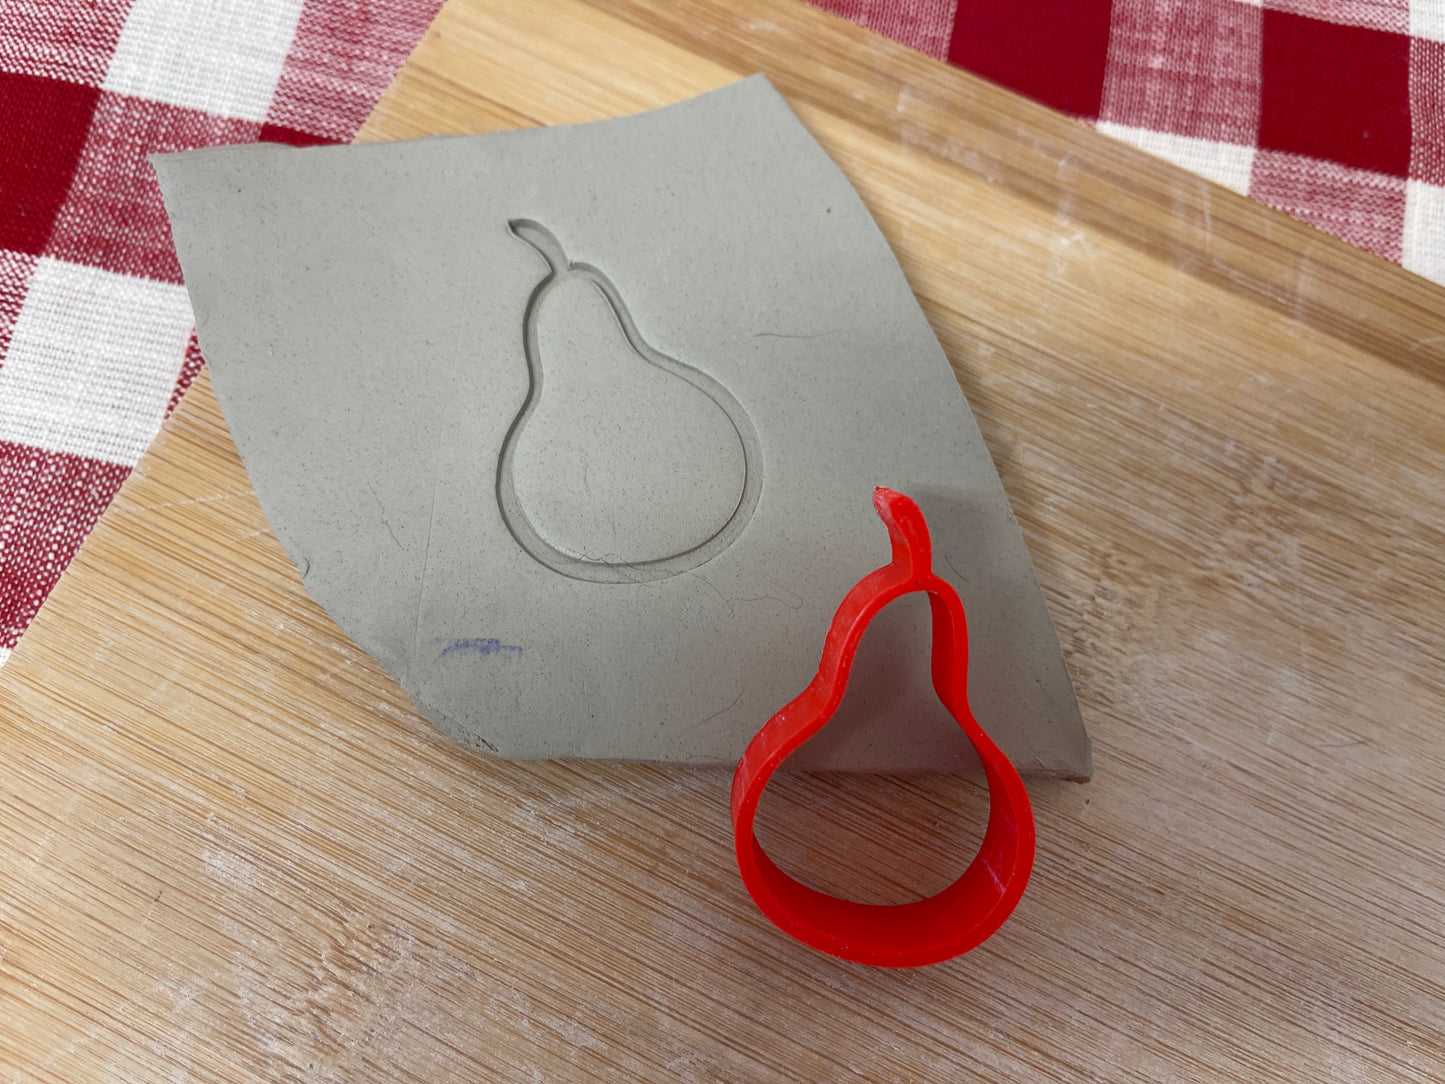 Pear Mini Pottery Stamp - plastic 3D printed, multiple sizes available, fruit shape